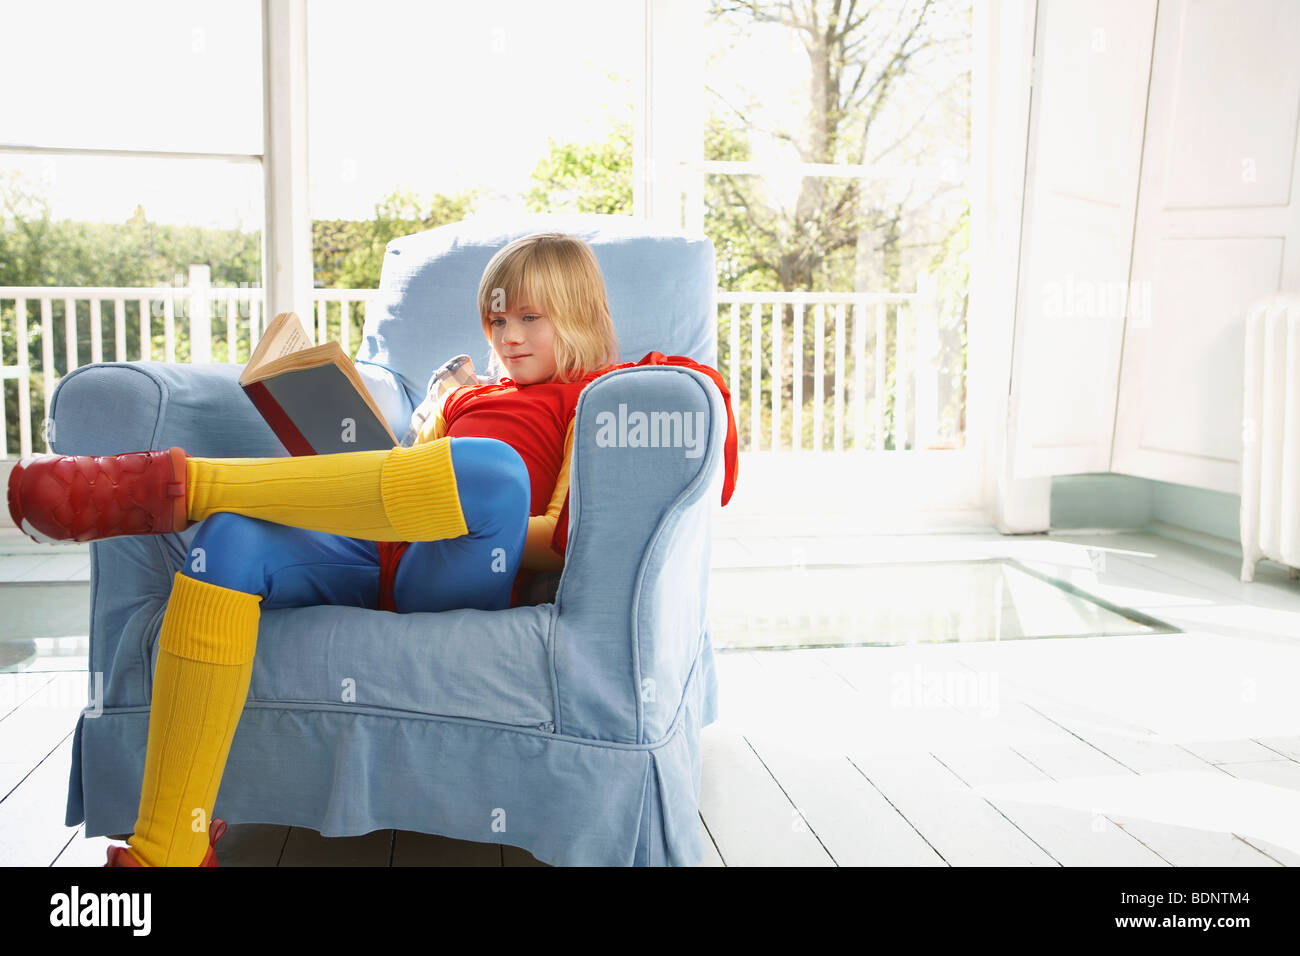 Young boy (7-9) sitting in armchair lecture, wearing superhero costume Banque D'Images